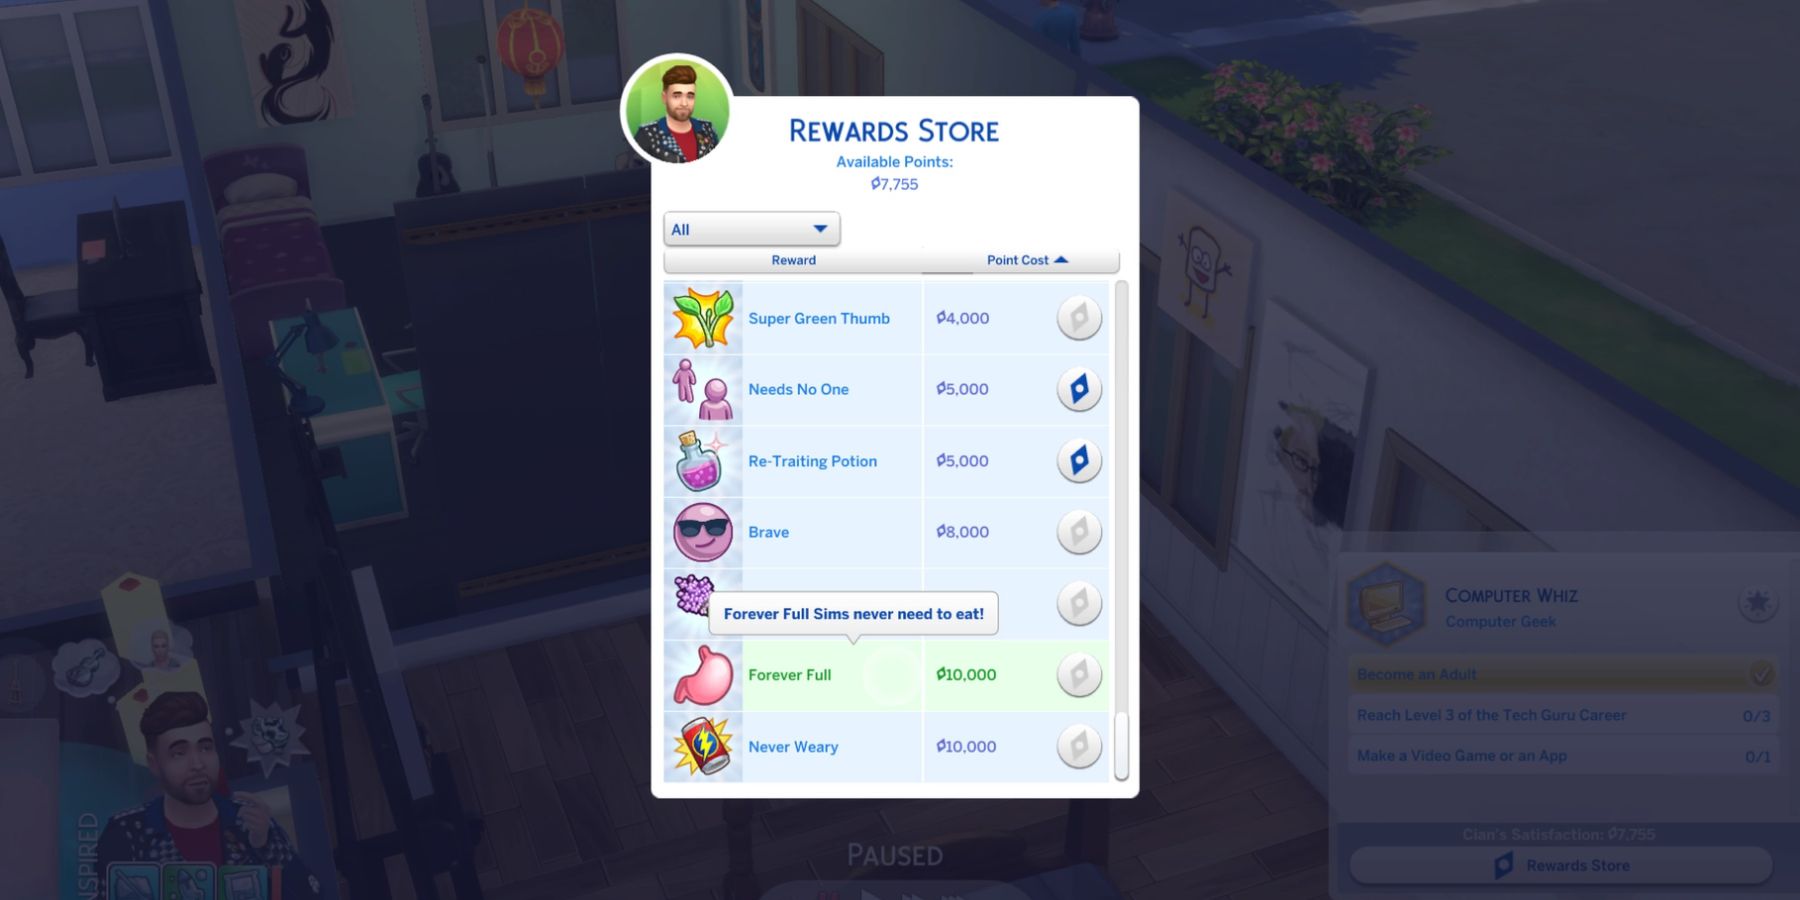 The Rewards Store in The Sims 4